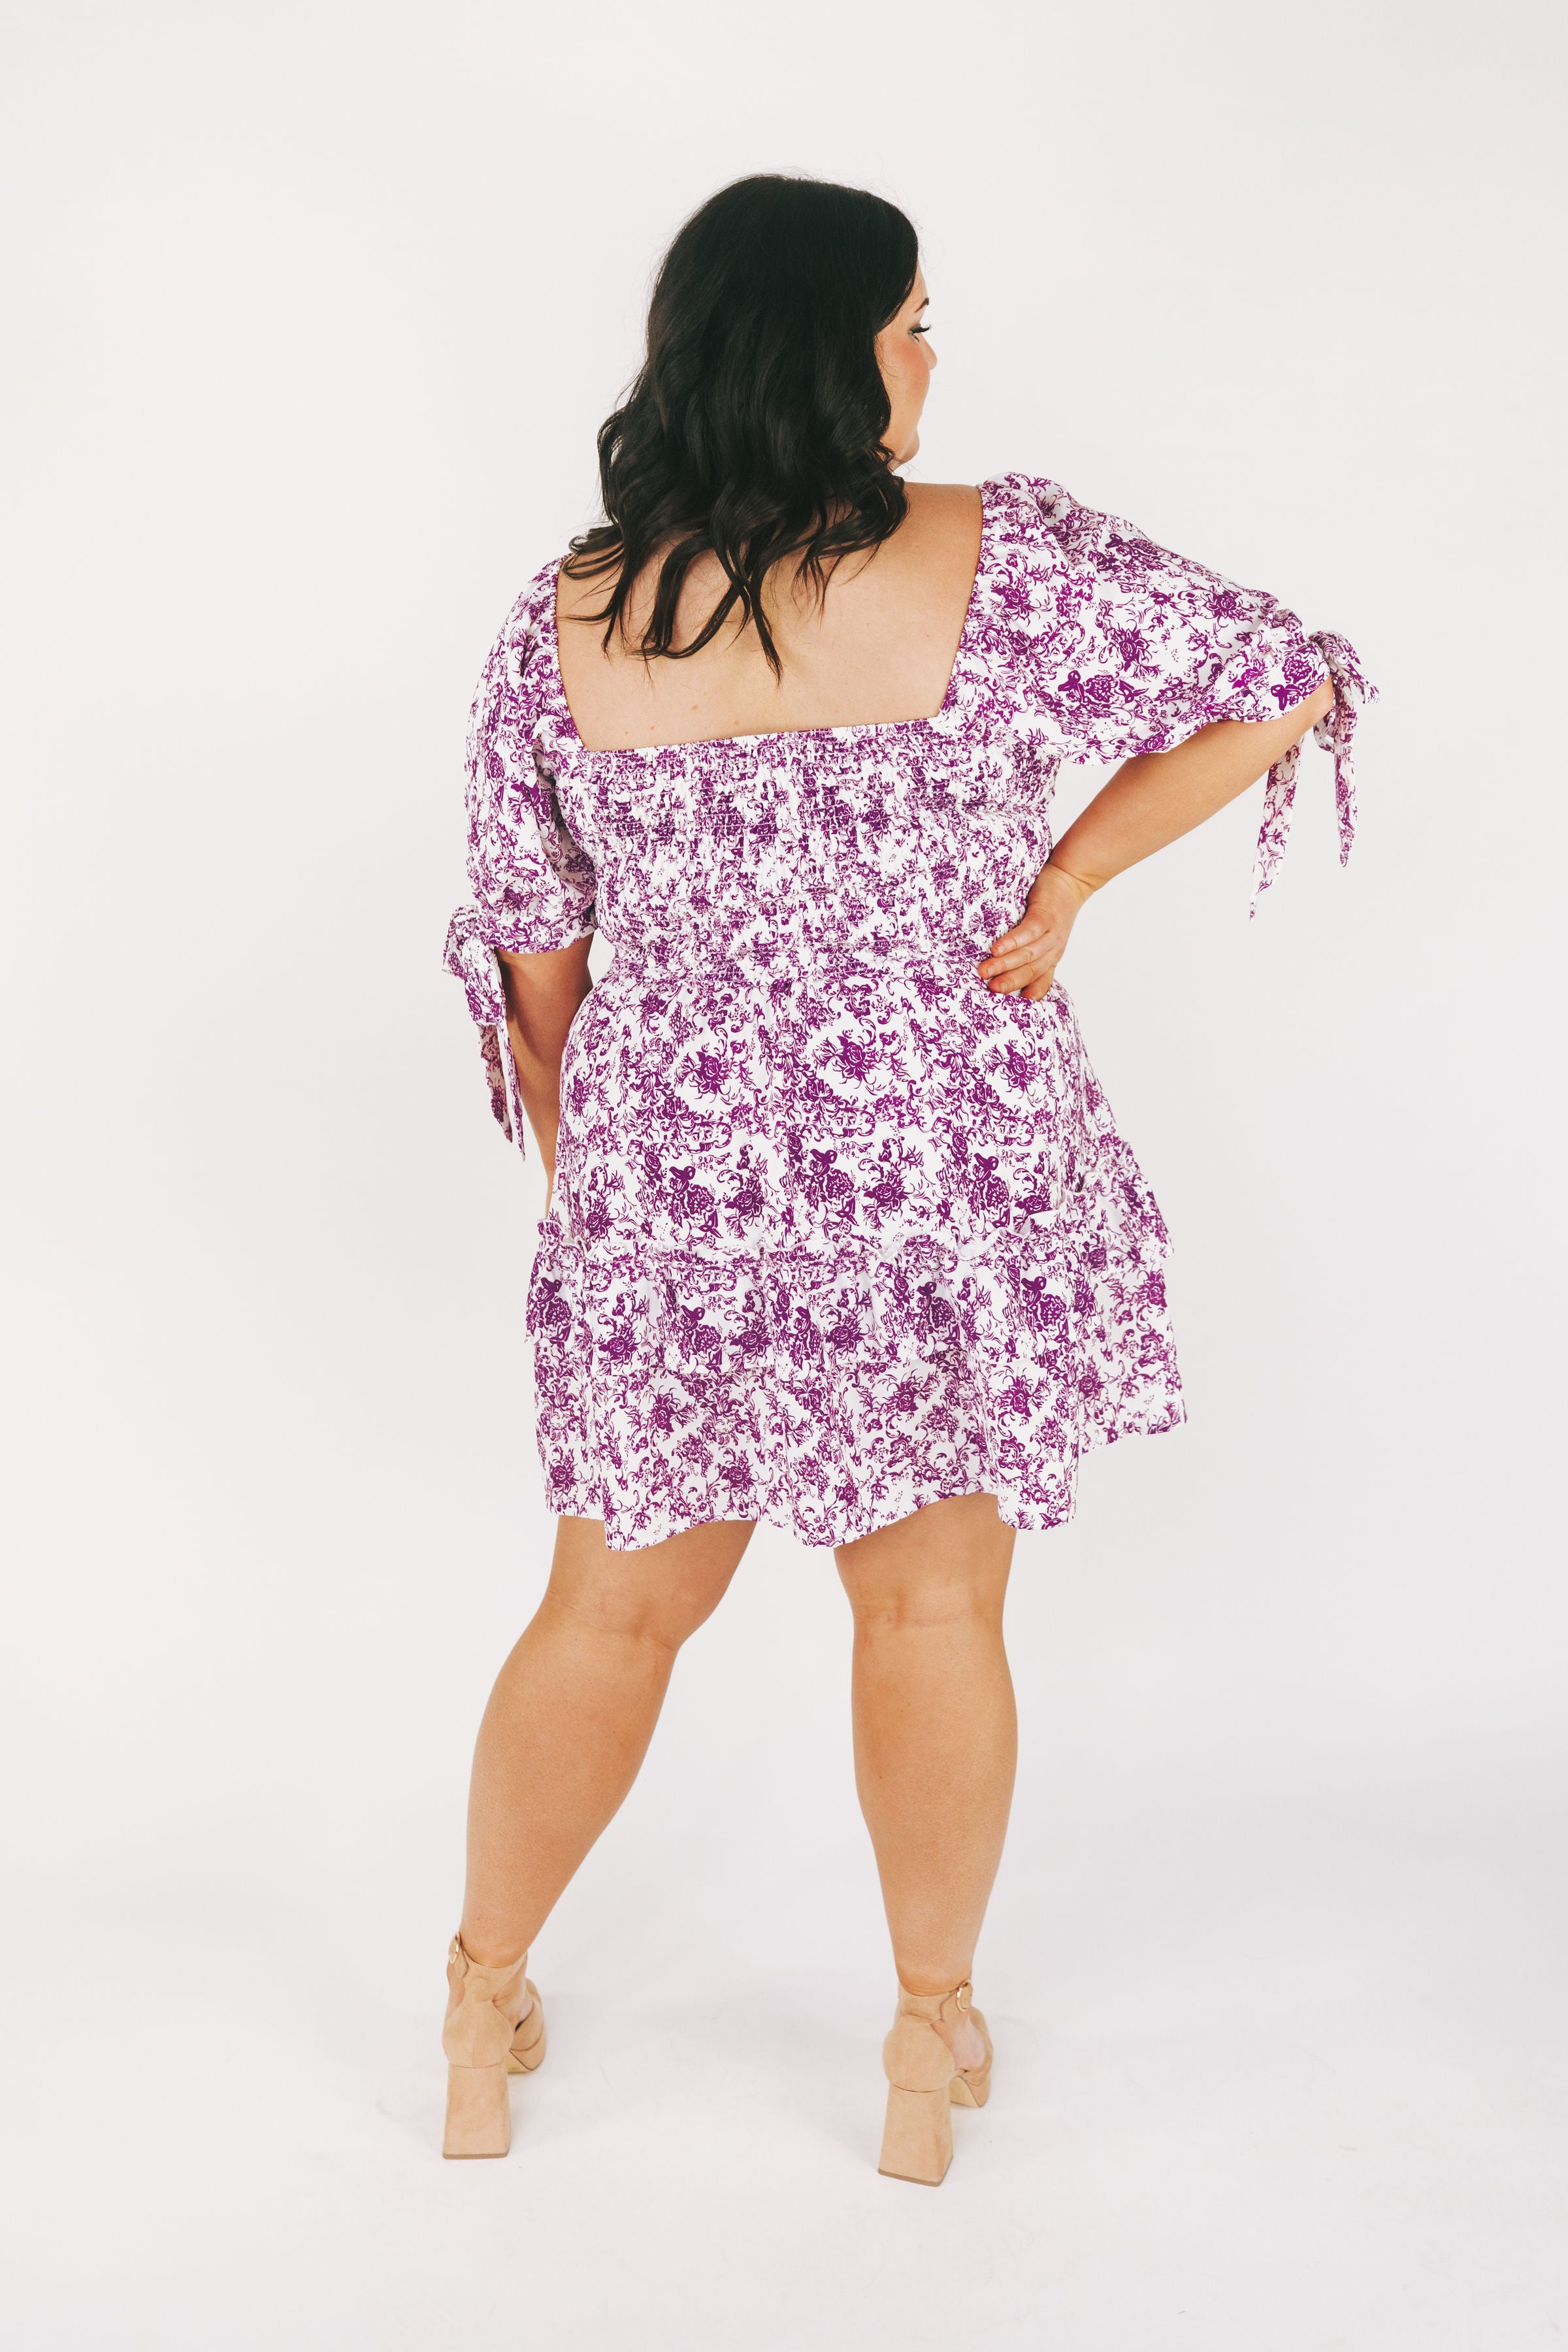 PLUS SIZE - Maybe It's Time Dress